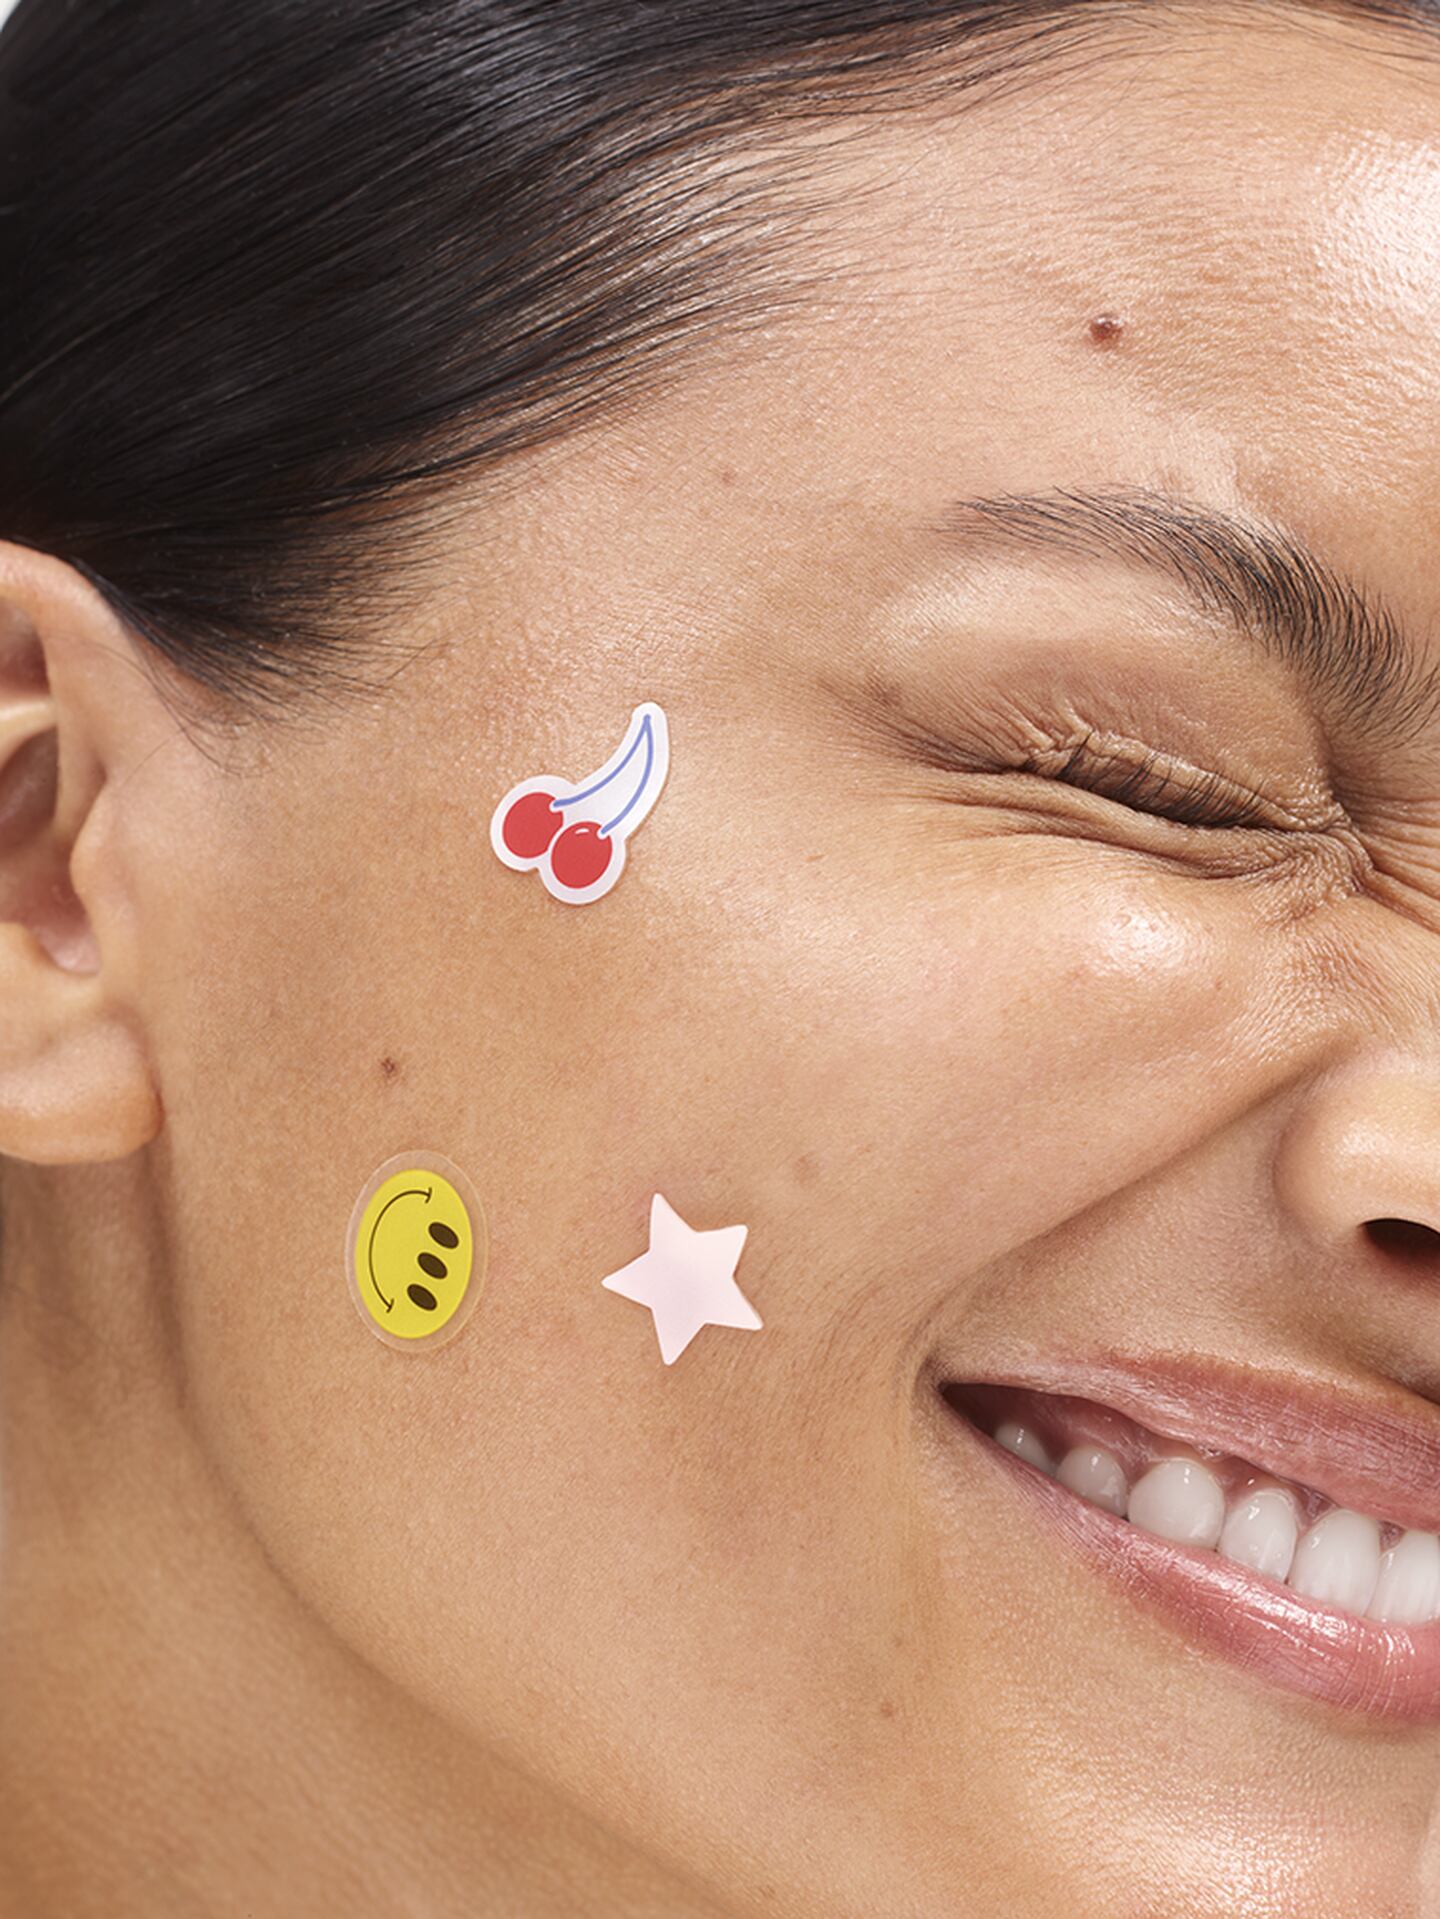 Glossier and Starface announce collaboration